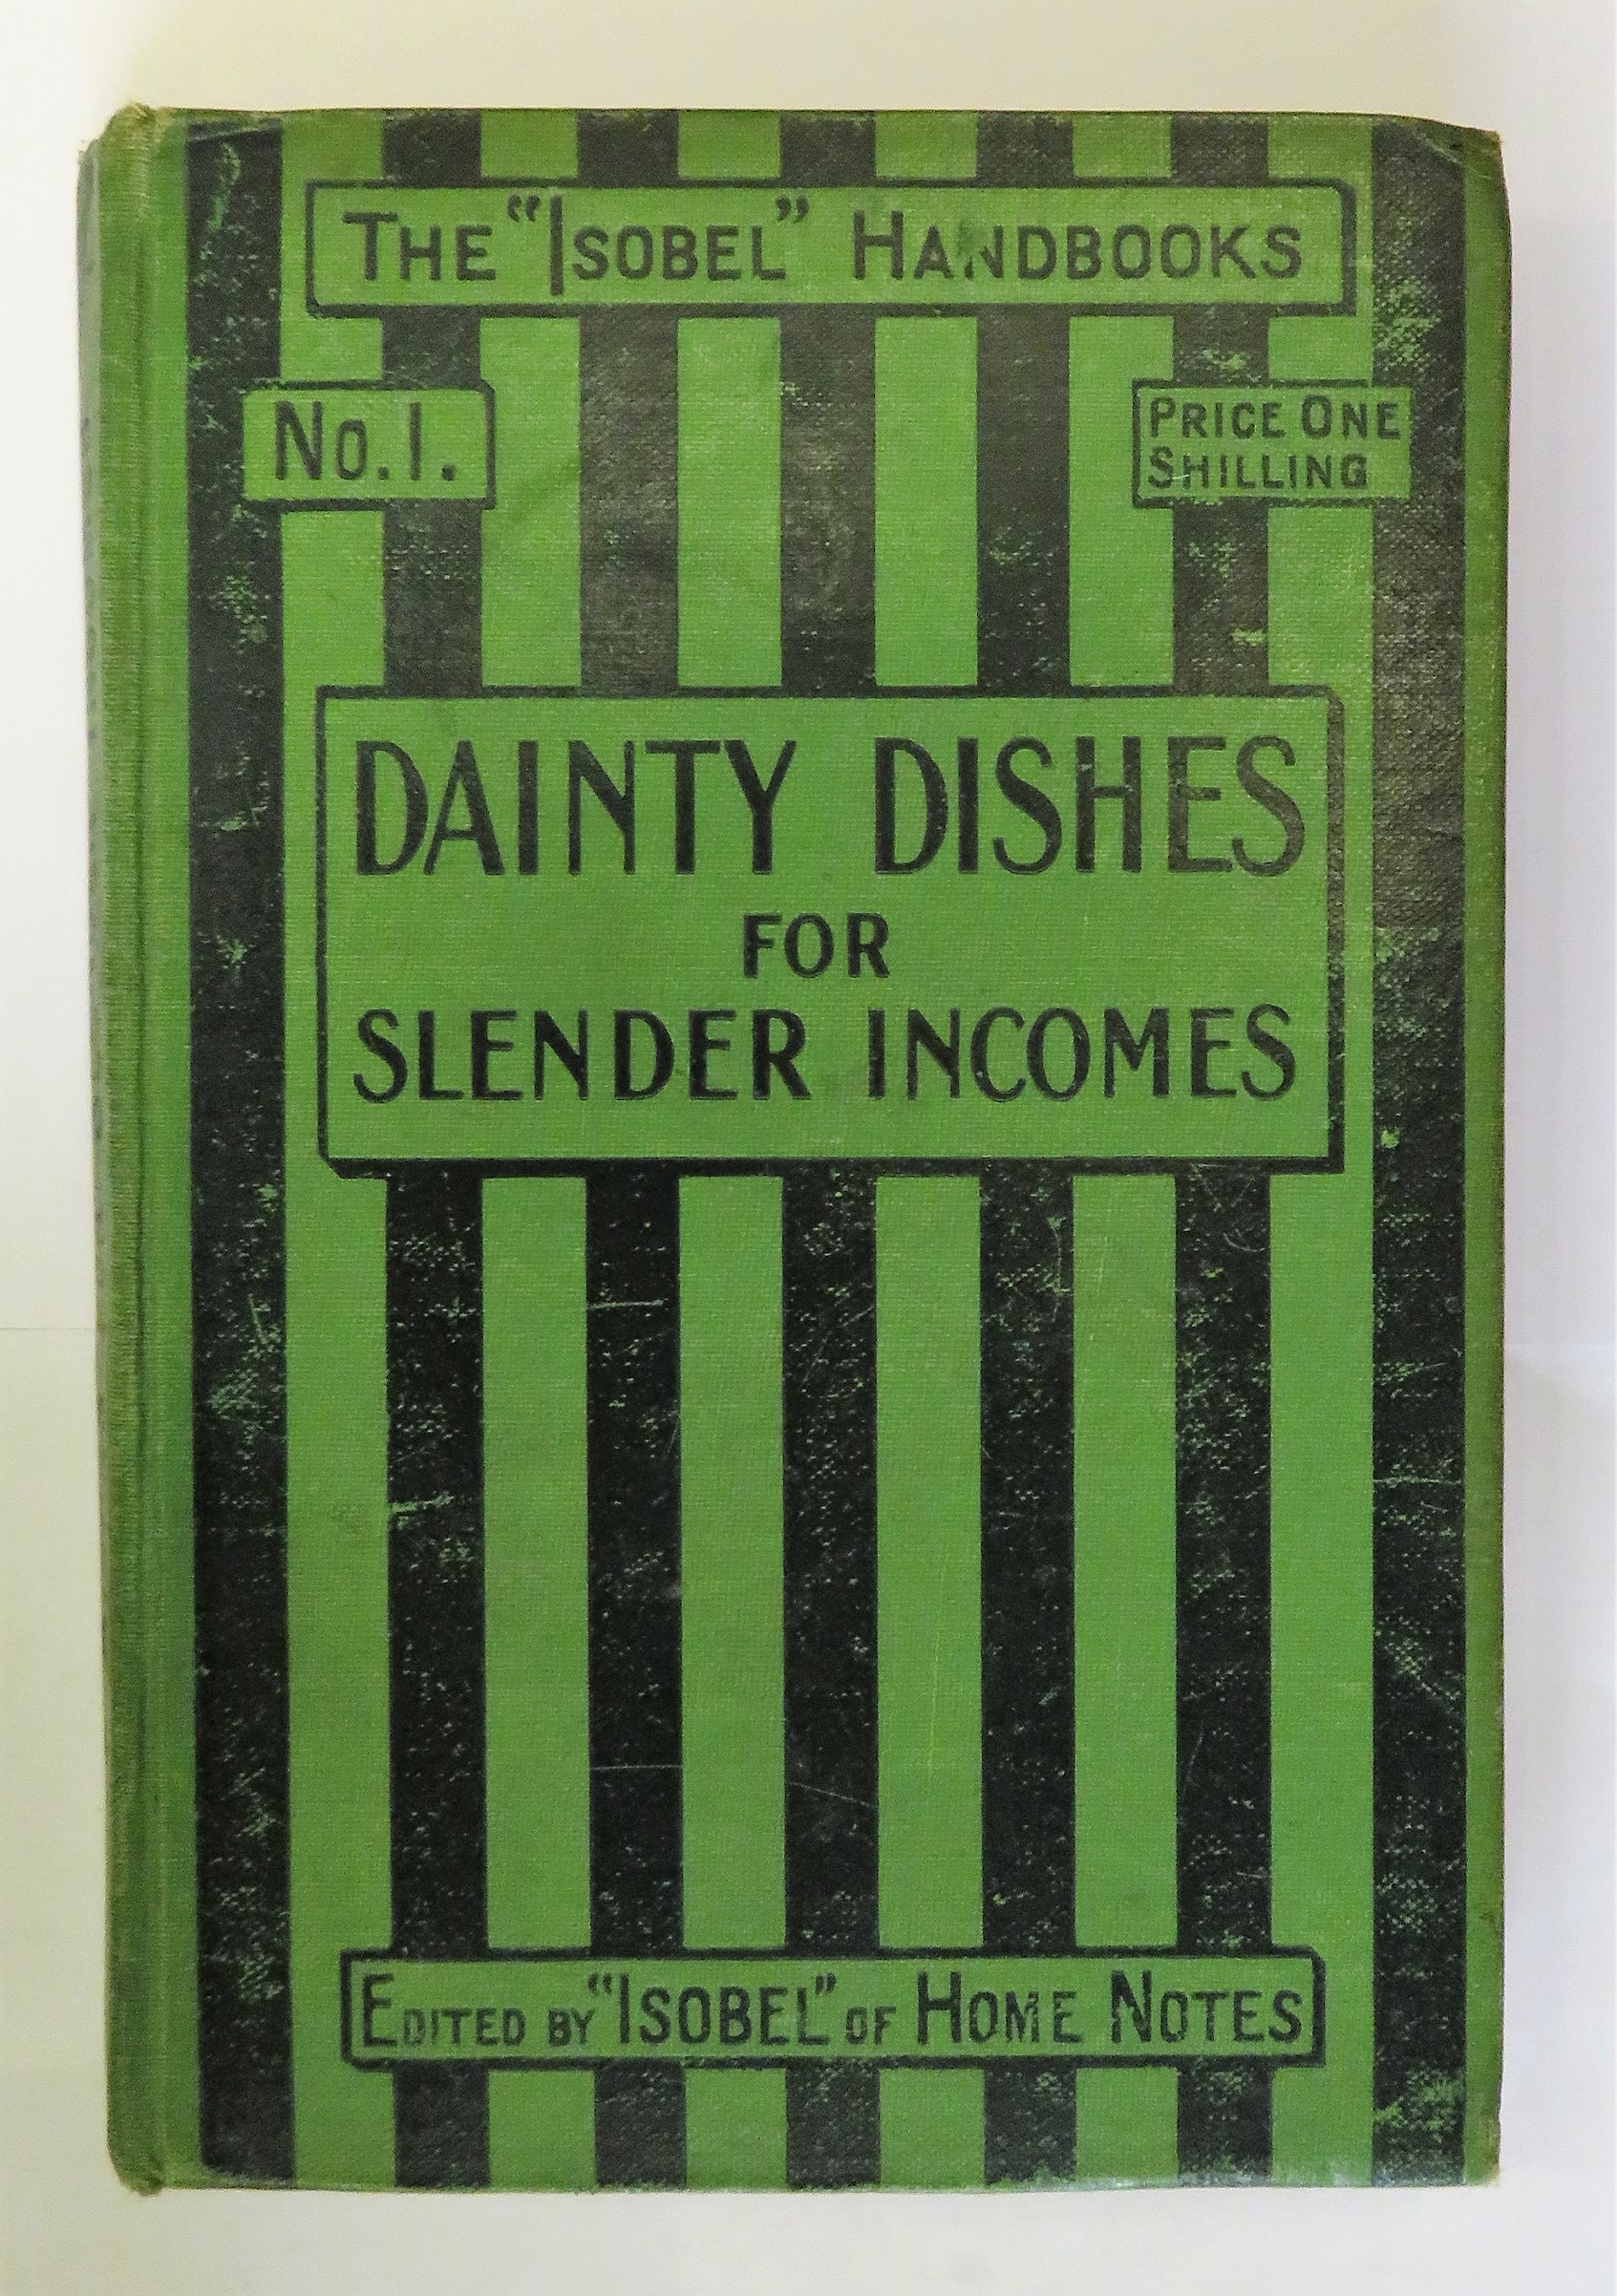 Dainty Dishes for Slender Incomes